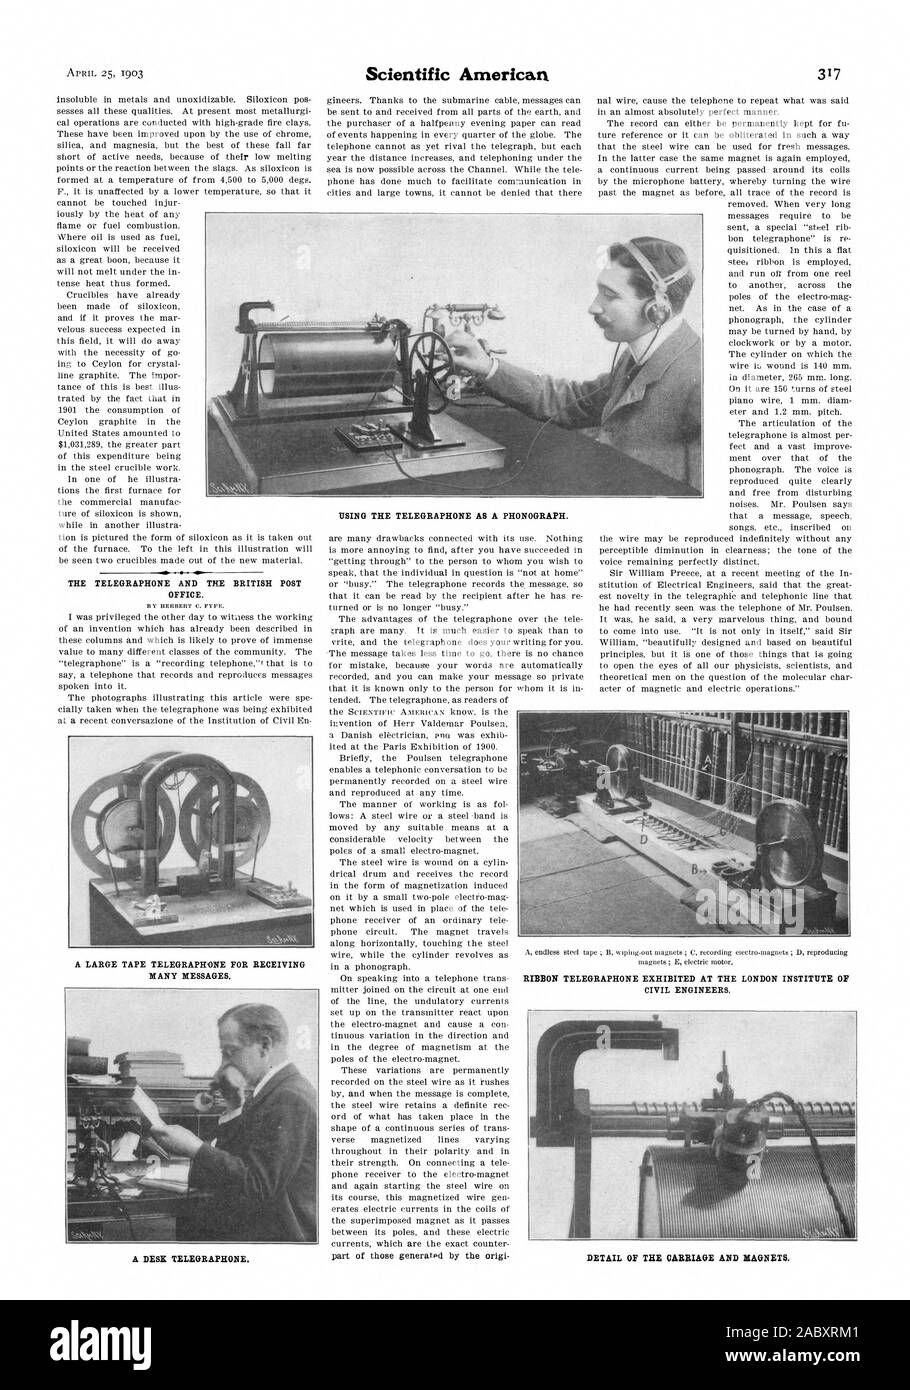 USING THE TELEGRAPHONE AS A PHONOGRAPH. A DESK TELEORAPHONE. DETAIL OF THE CARRIAGE AND MAGNETS., scientific american, 1903-04-25 Stock Photo